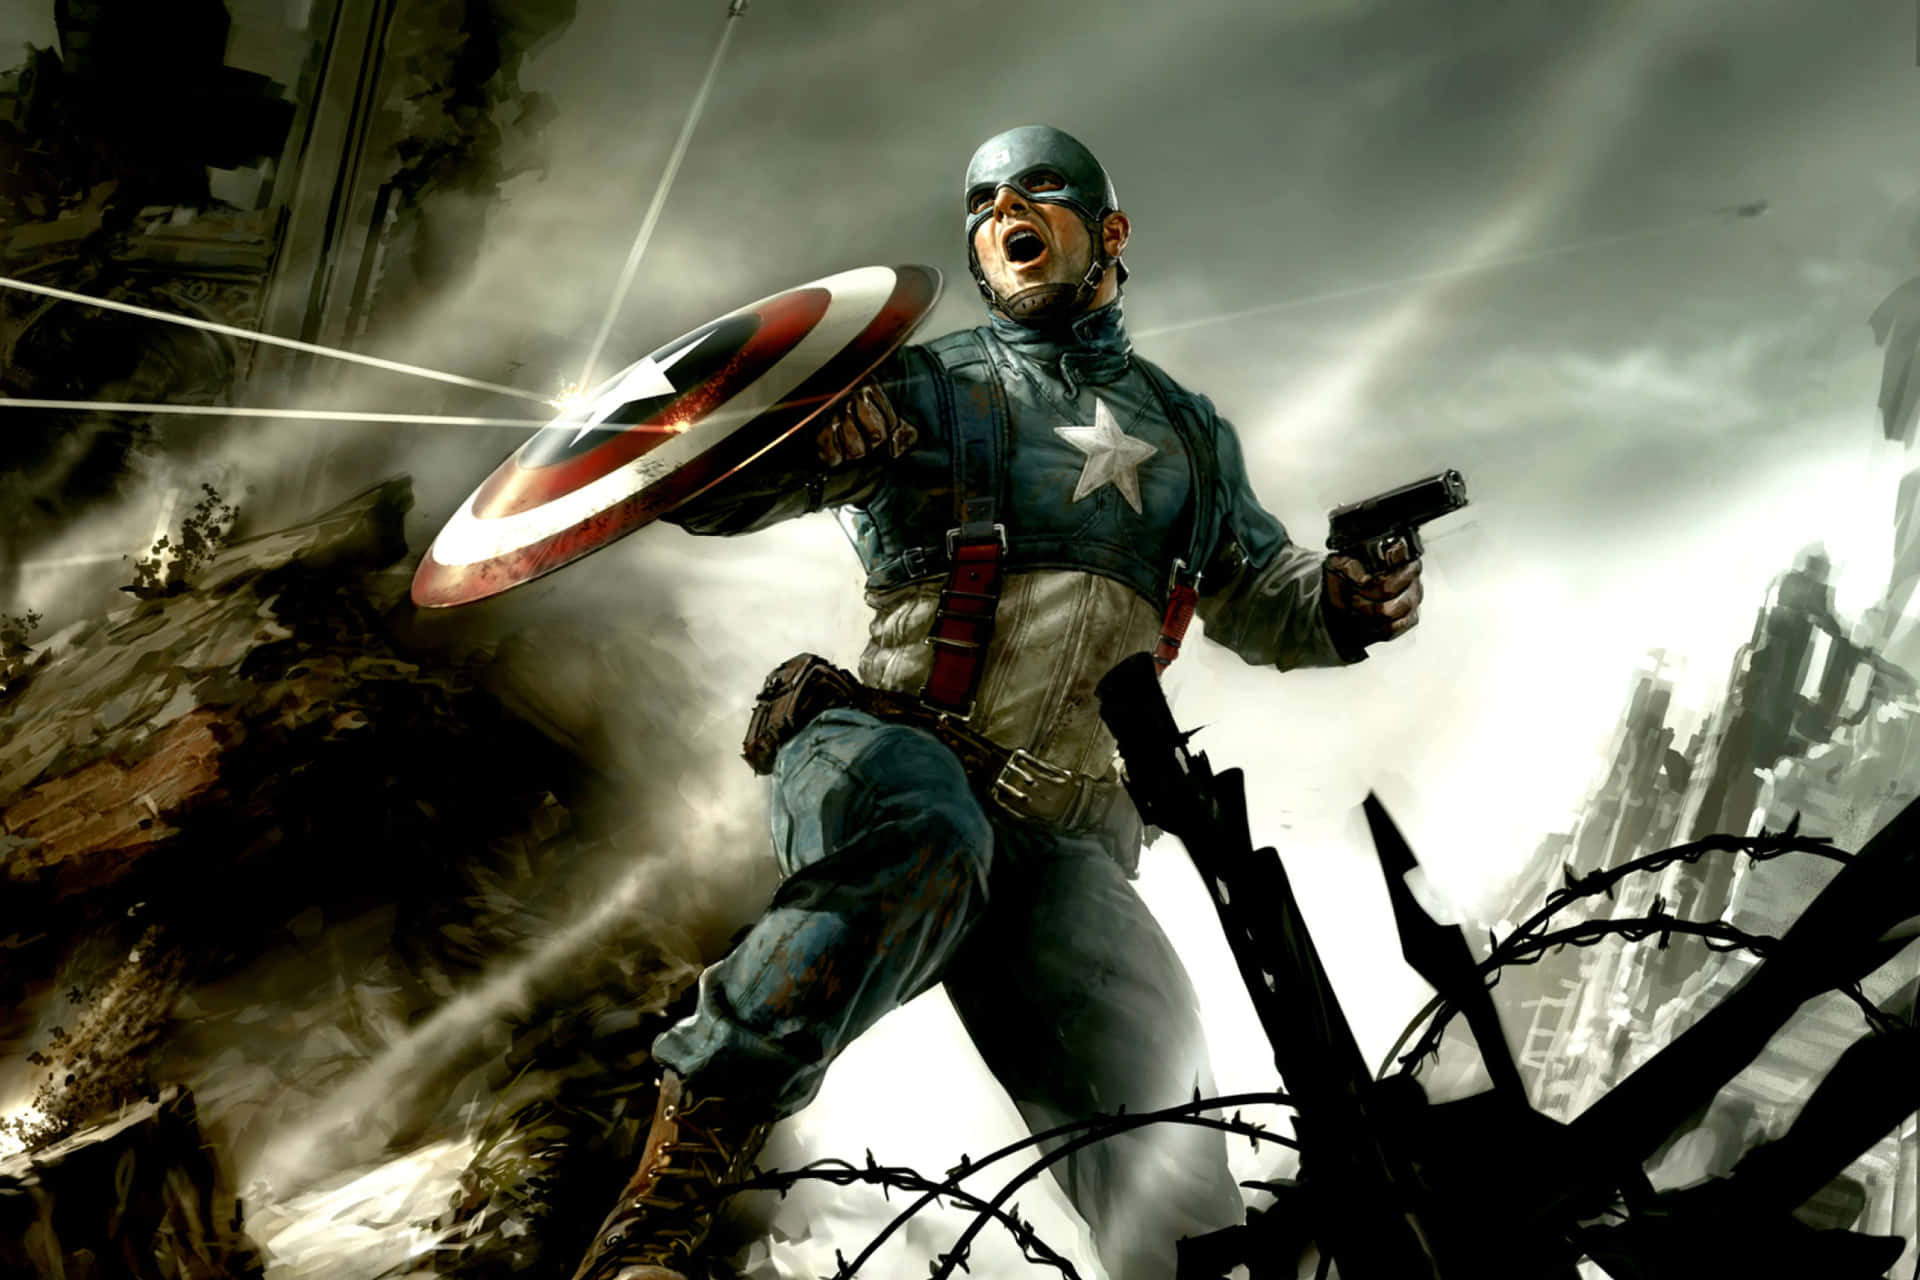 Start Your Day the Superhero Way with a Captain America Desktop Wallpaper